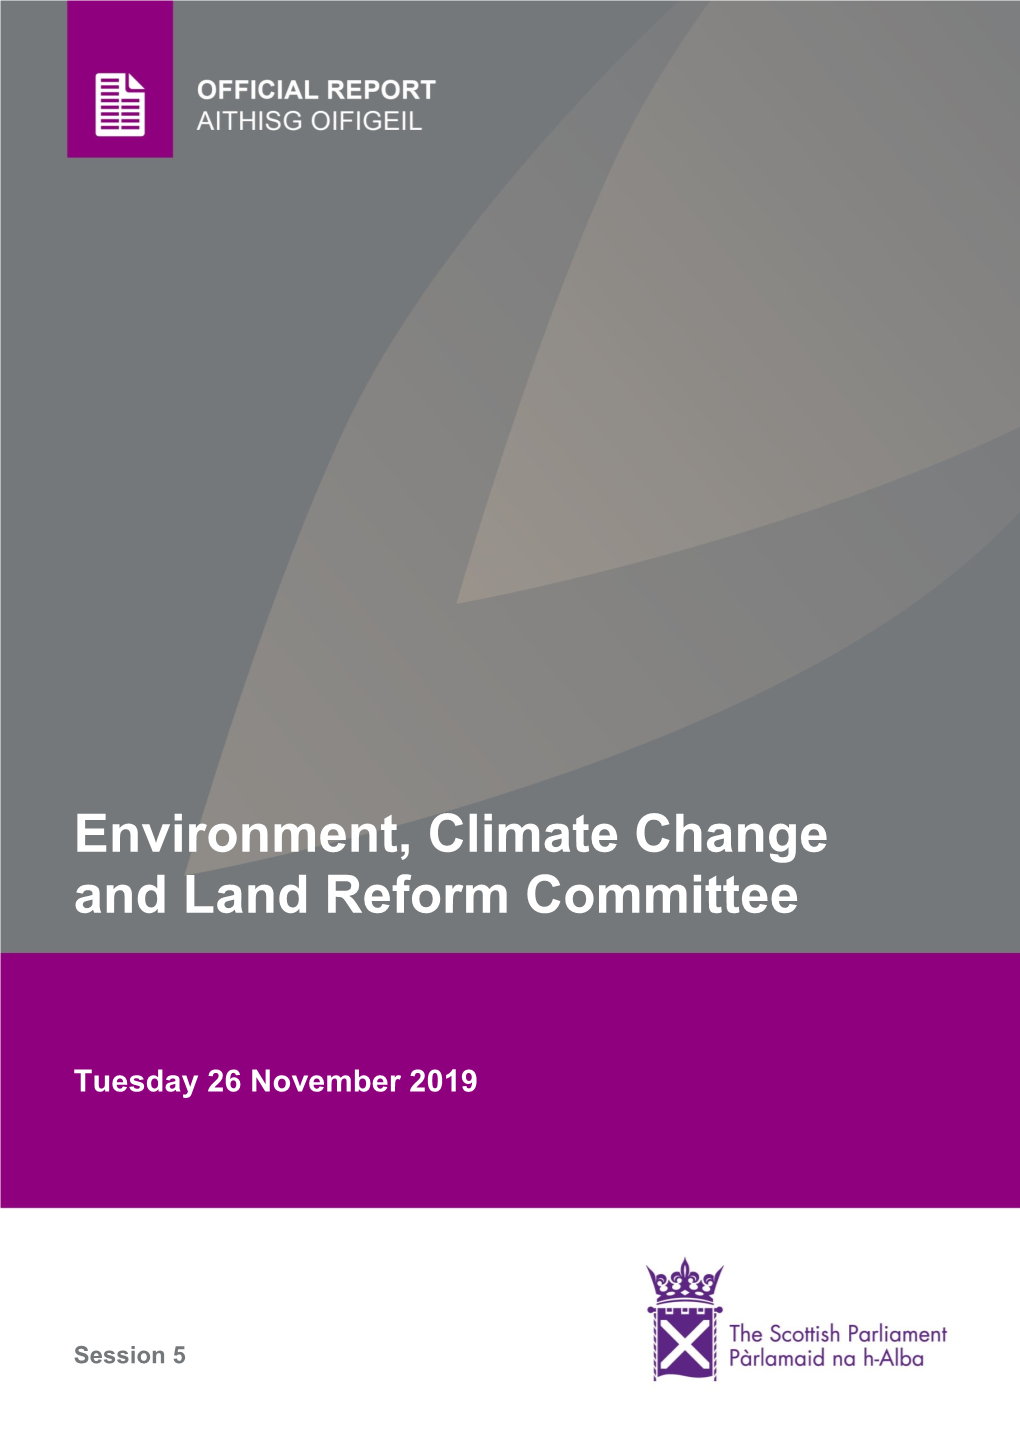 Environment, Climate Change and Land Reform Committee